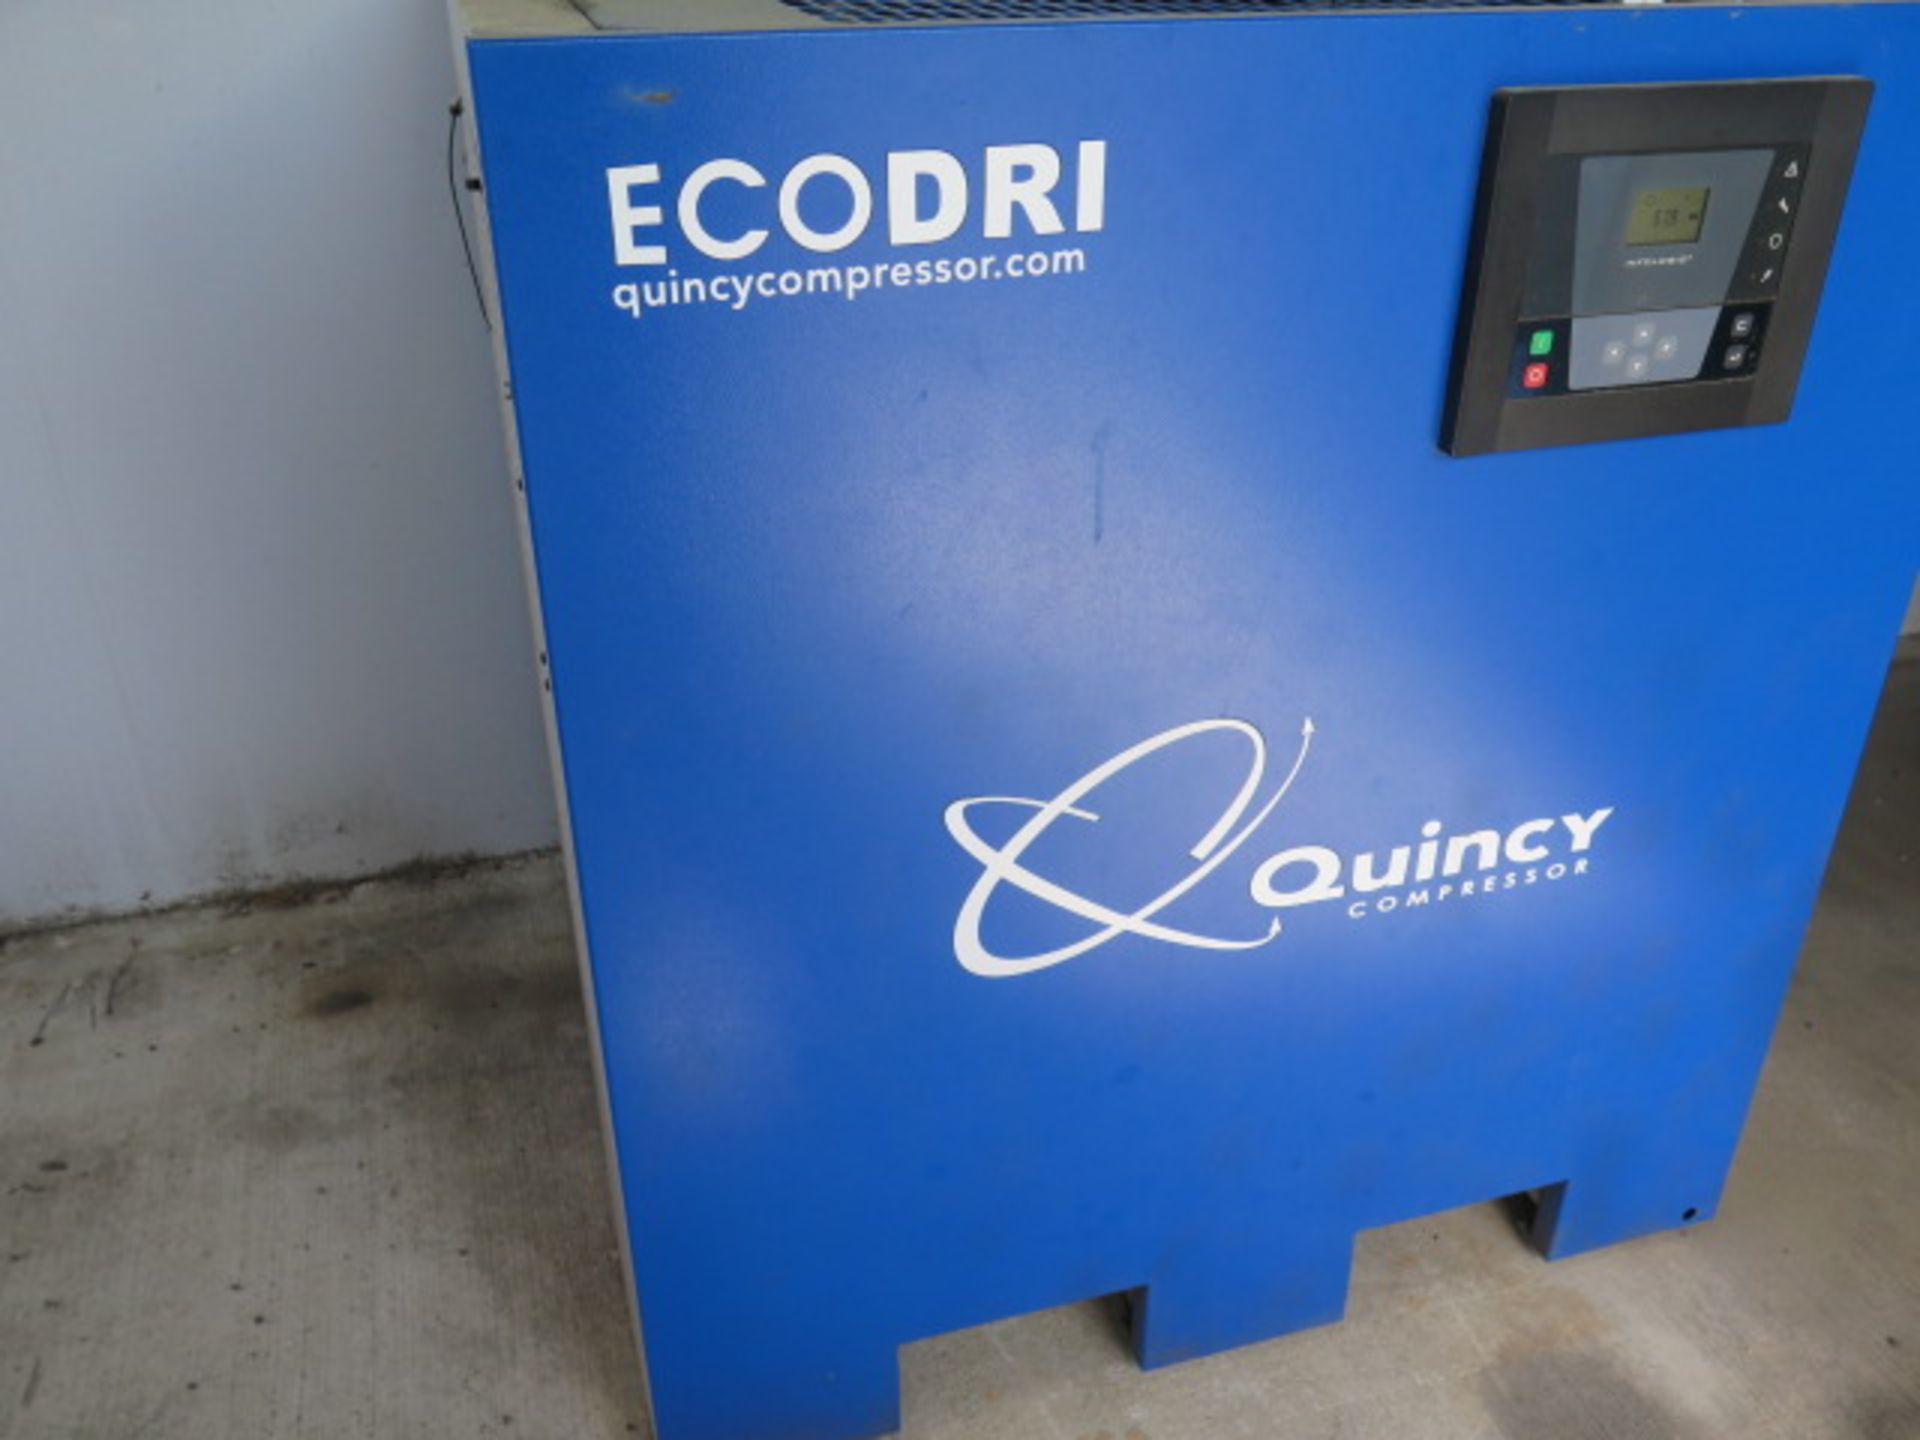 2018 Quincy “ECO DRI” mdl. QED-450 Refrigerated Air Dryer s/n ITJ158822 (SOLD AS-IS - NO WARRANTY) - Image 3 of 8